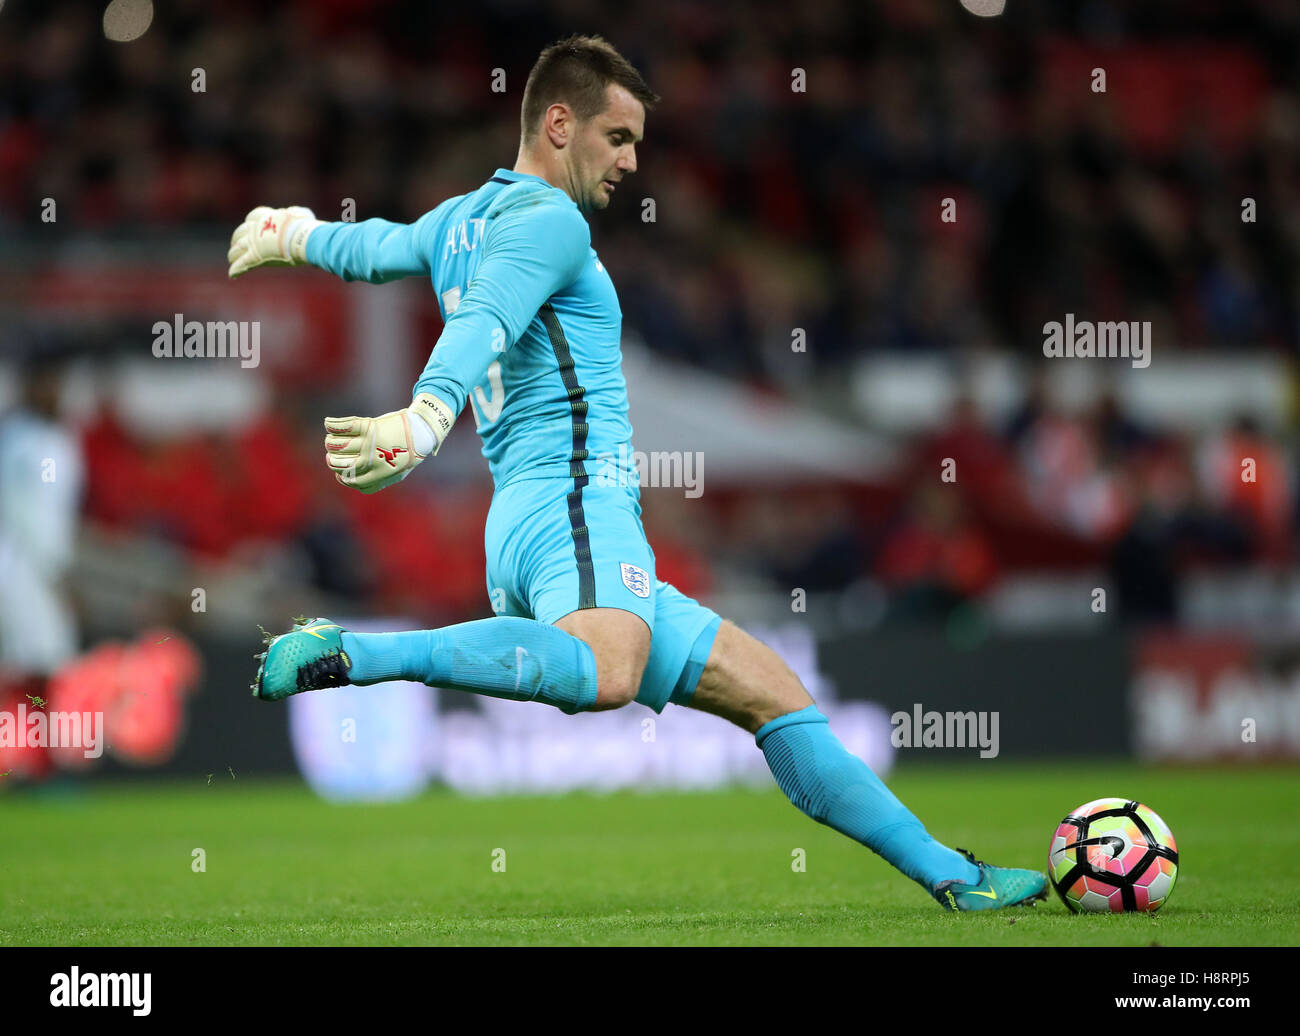 England goalkeeper Tom Heaton during the International Friendly at Wembley Stadium, London. PRESS ASSOCIATION Photo. Picture date: Tuesday November 15, 2016. See PA story SOCCER England. Photo credit should read: Nick Potts/PA Wire. Stock Photo